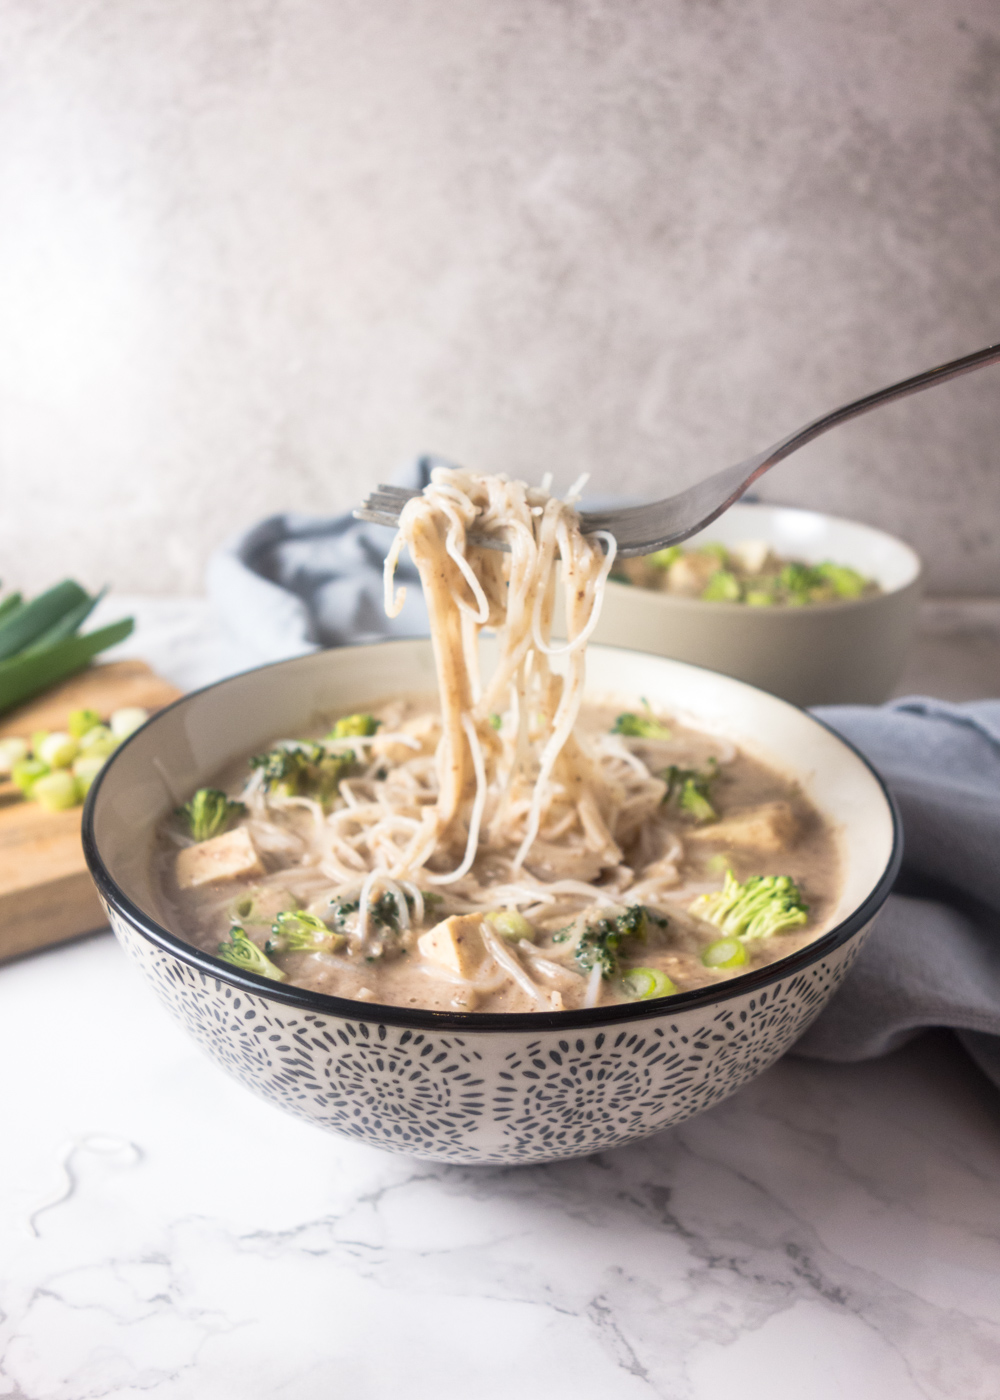 Peanut Miso Noodle Soup: Tofu and noodles in a rich, nutty miso broth makes a deliciously savoury comforting meal that's quick & easy to cook.